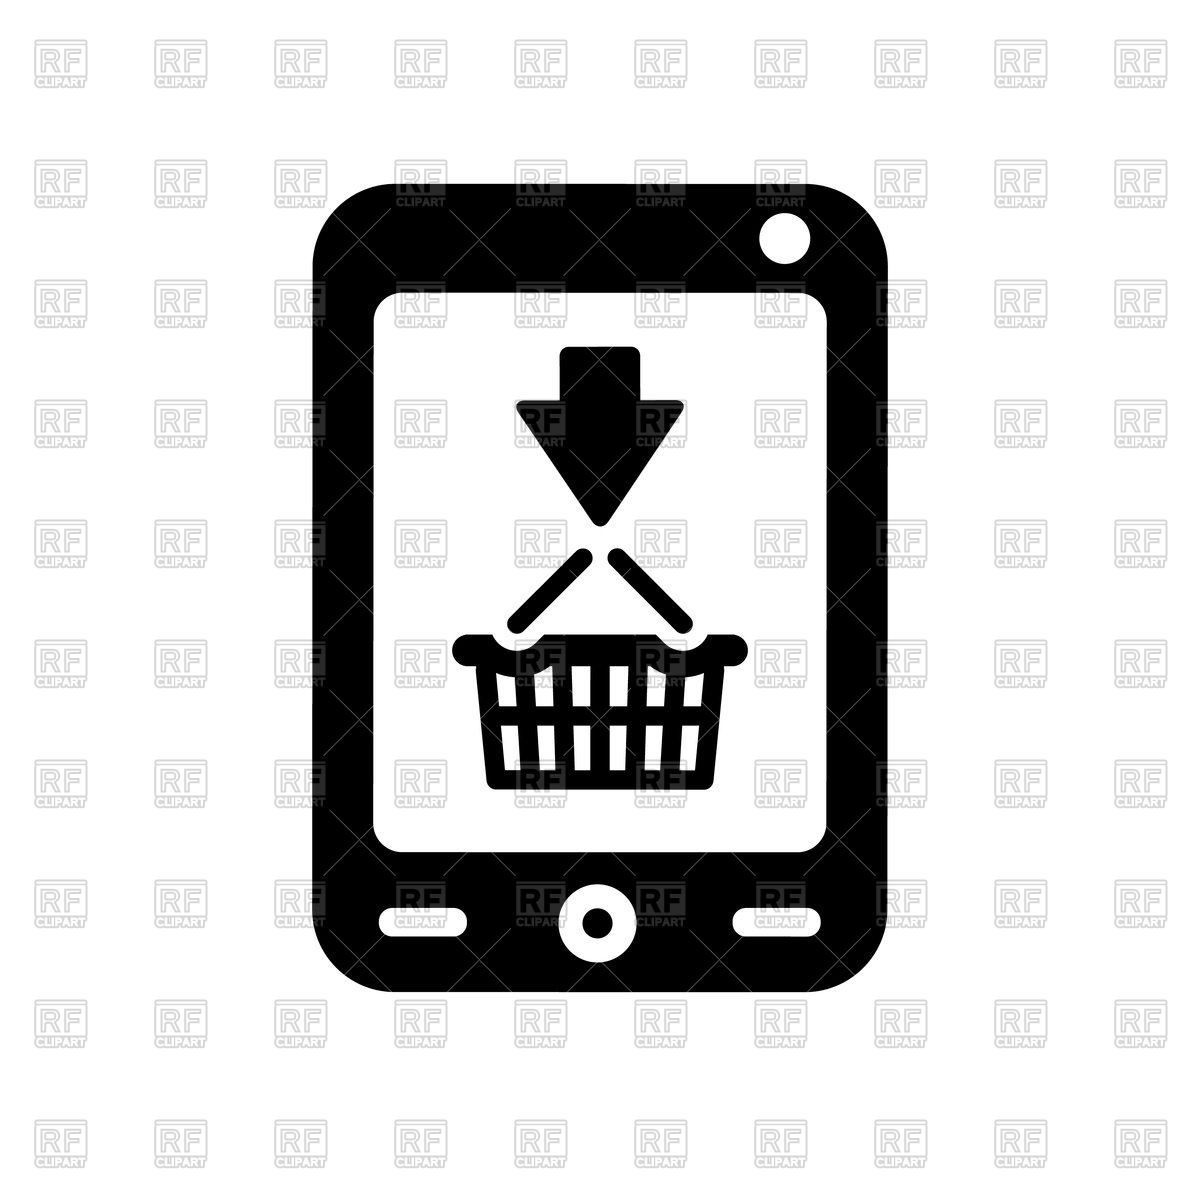 Buy online black icon on white background Stock Vector Image.